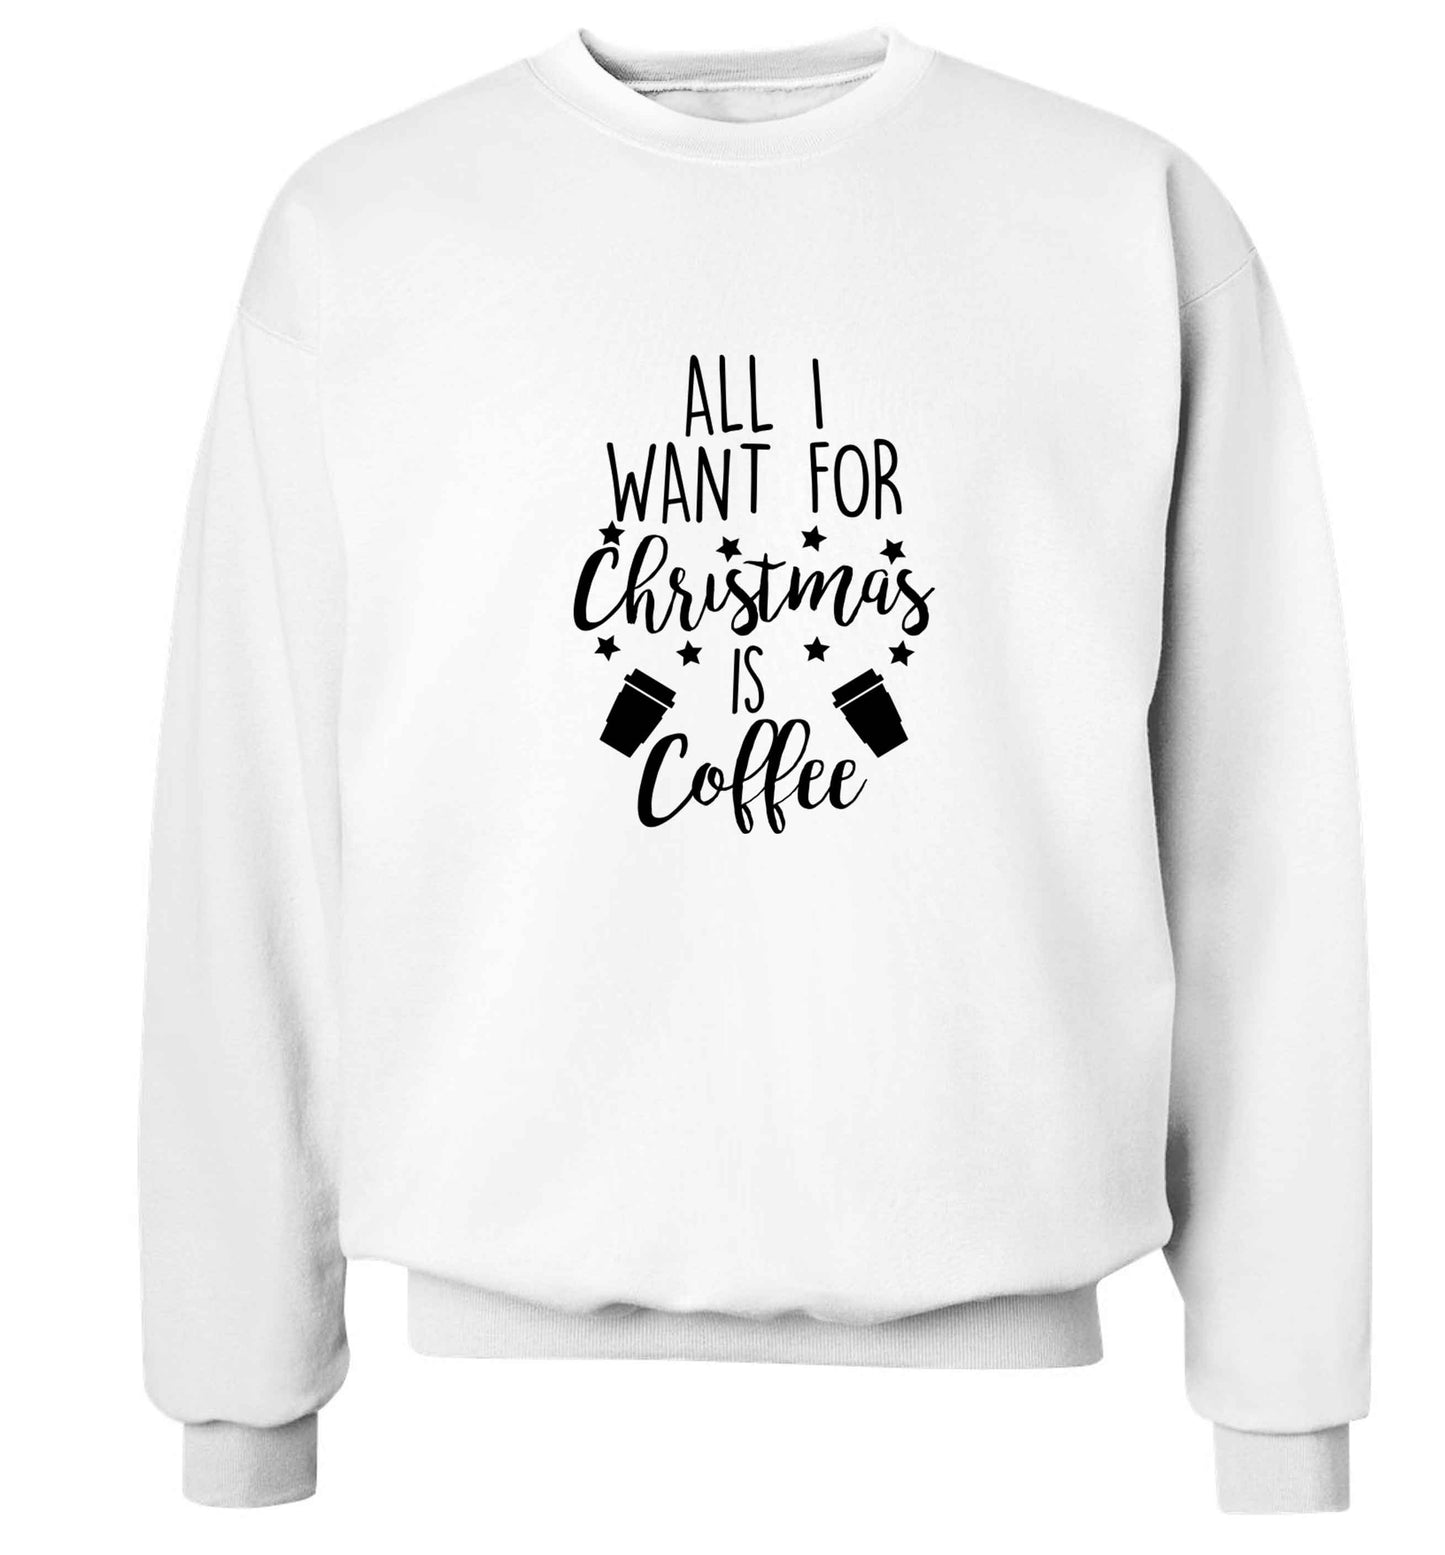 All I want for Christmas is coffee Adult's unisex white Sweater 2XL